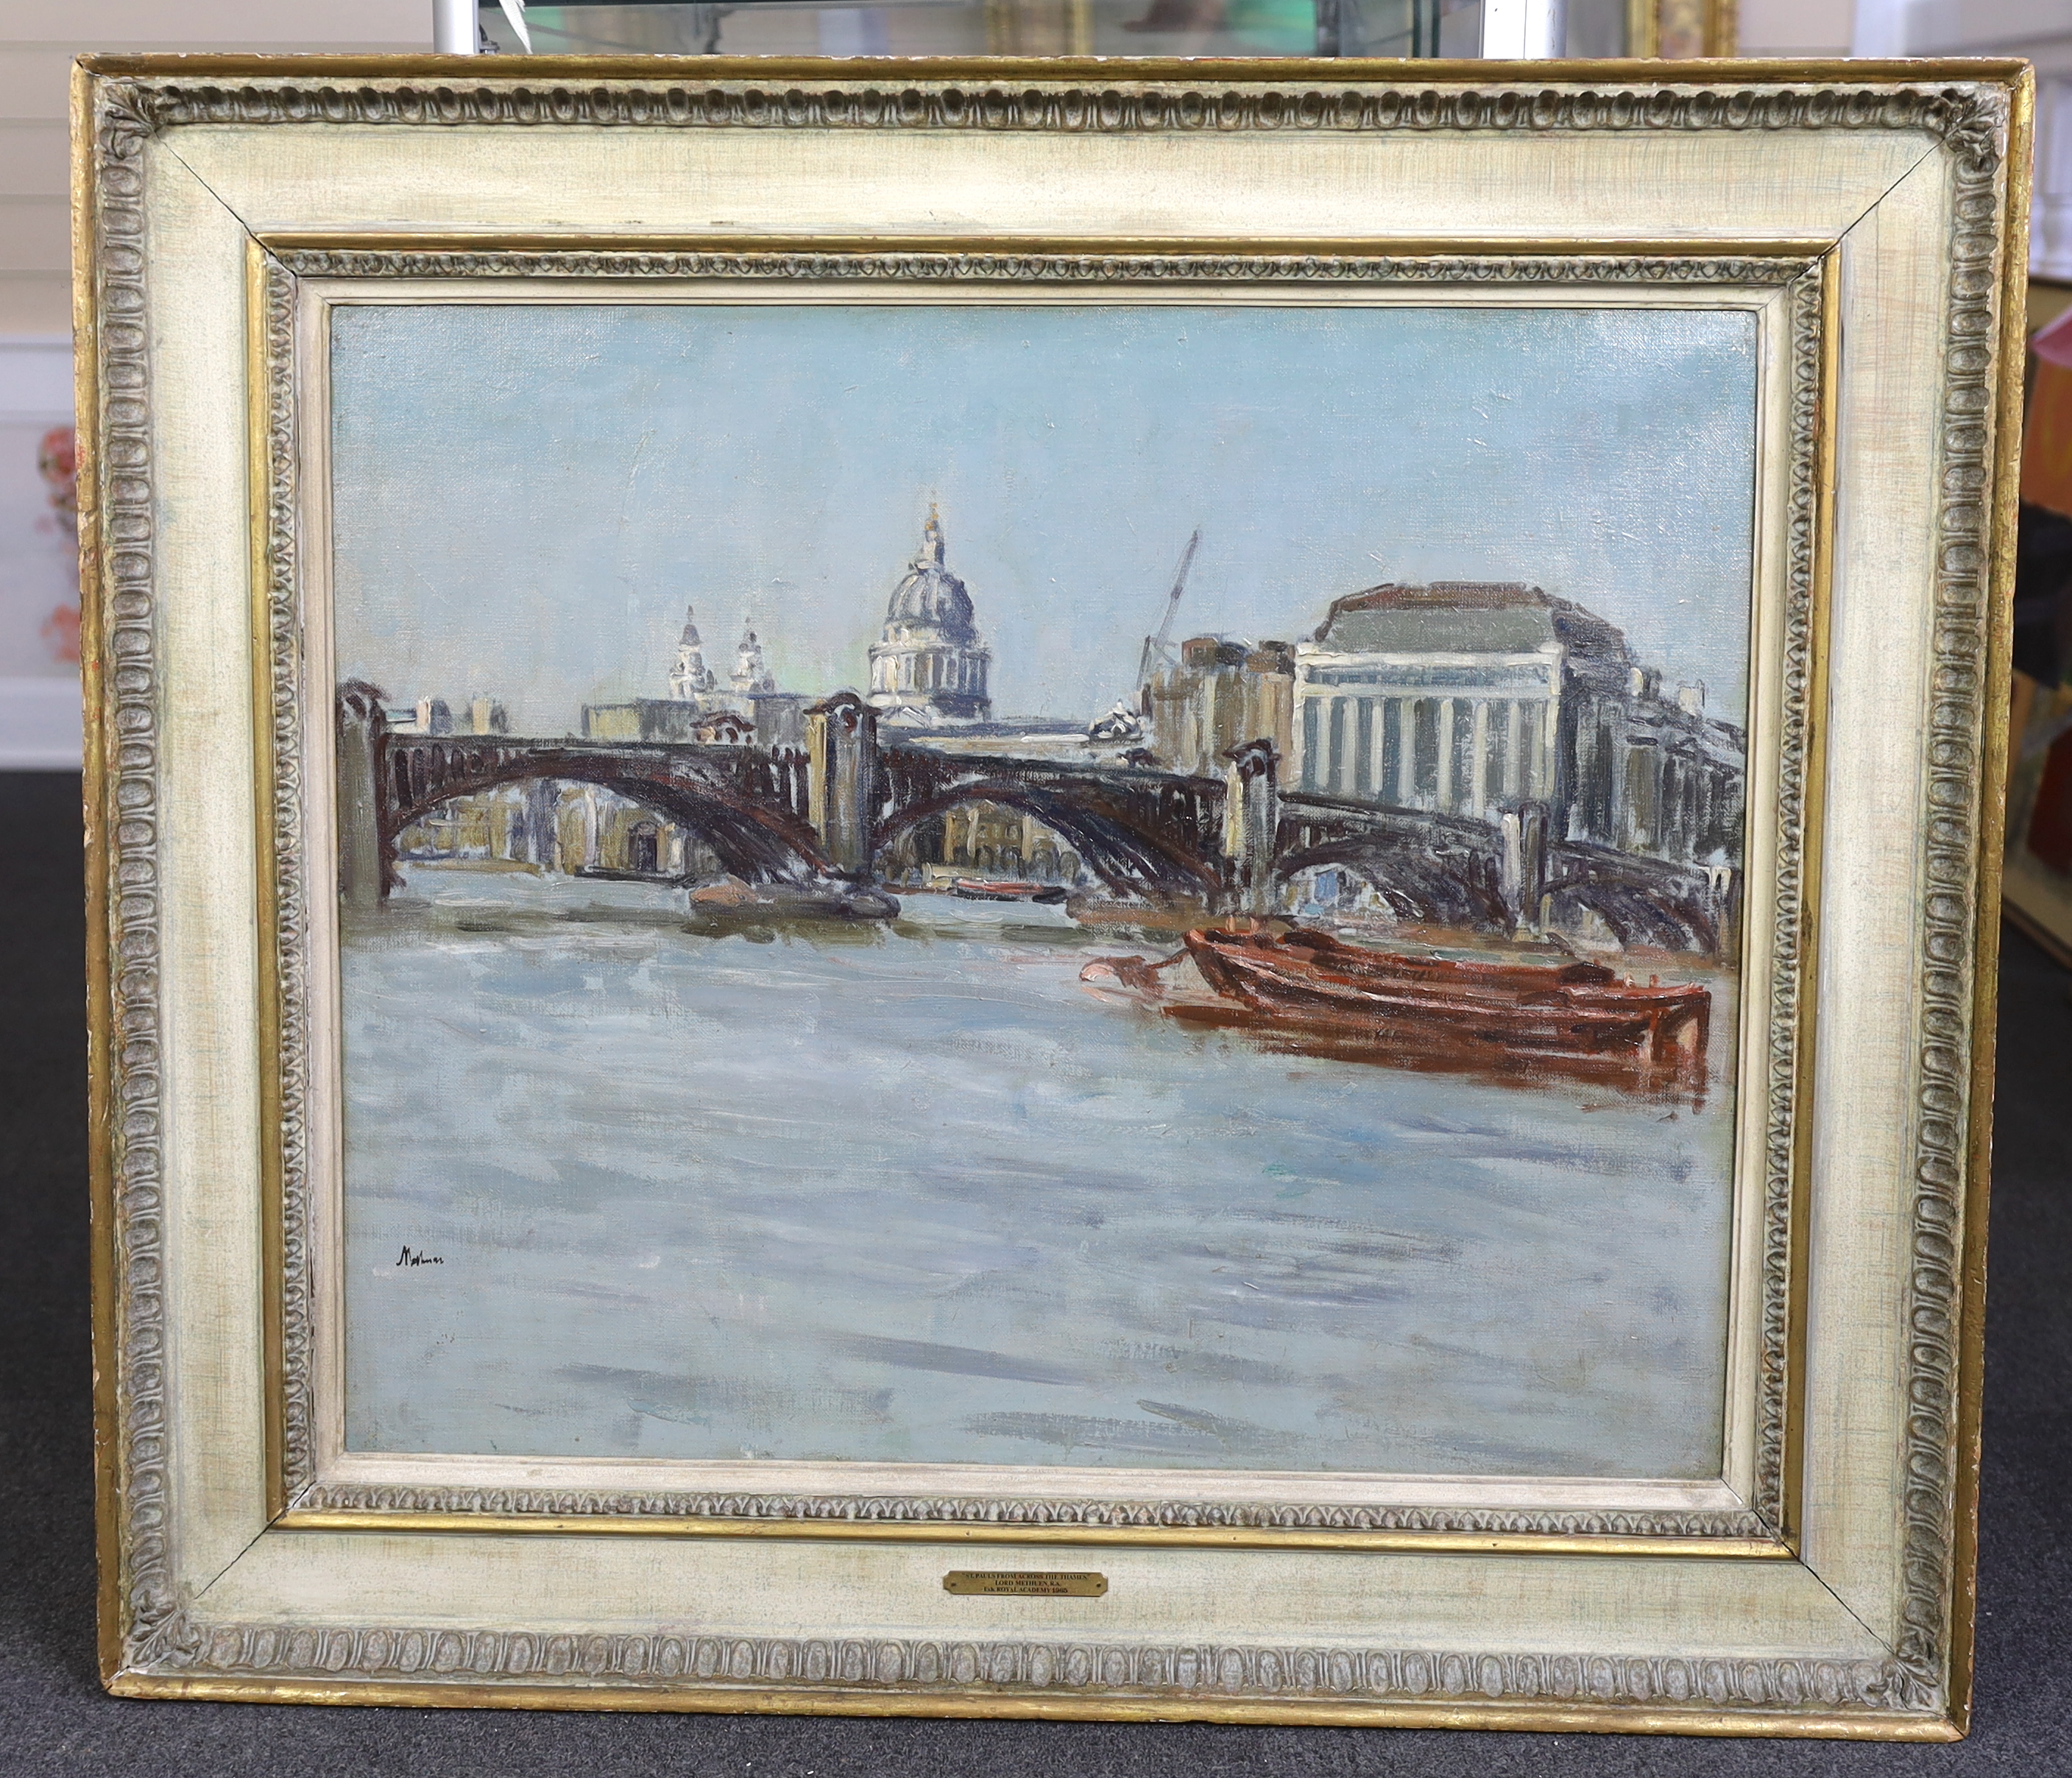 Lord Paul Ayshford Methuen R.A. (English, 1886-1974), 'St Paul's from across The Thames', oil on canvas, 63 x 76cm